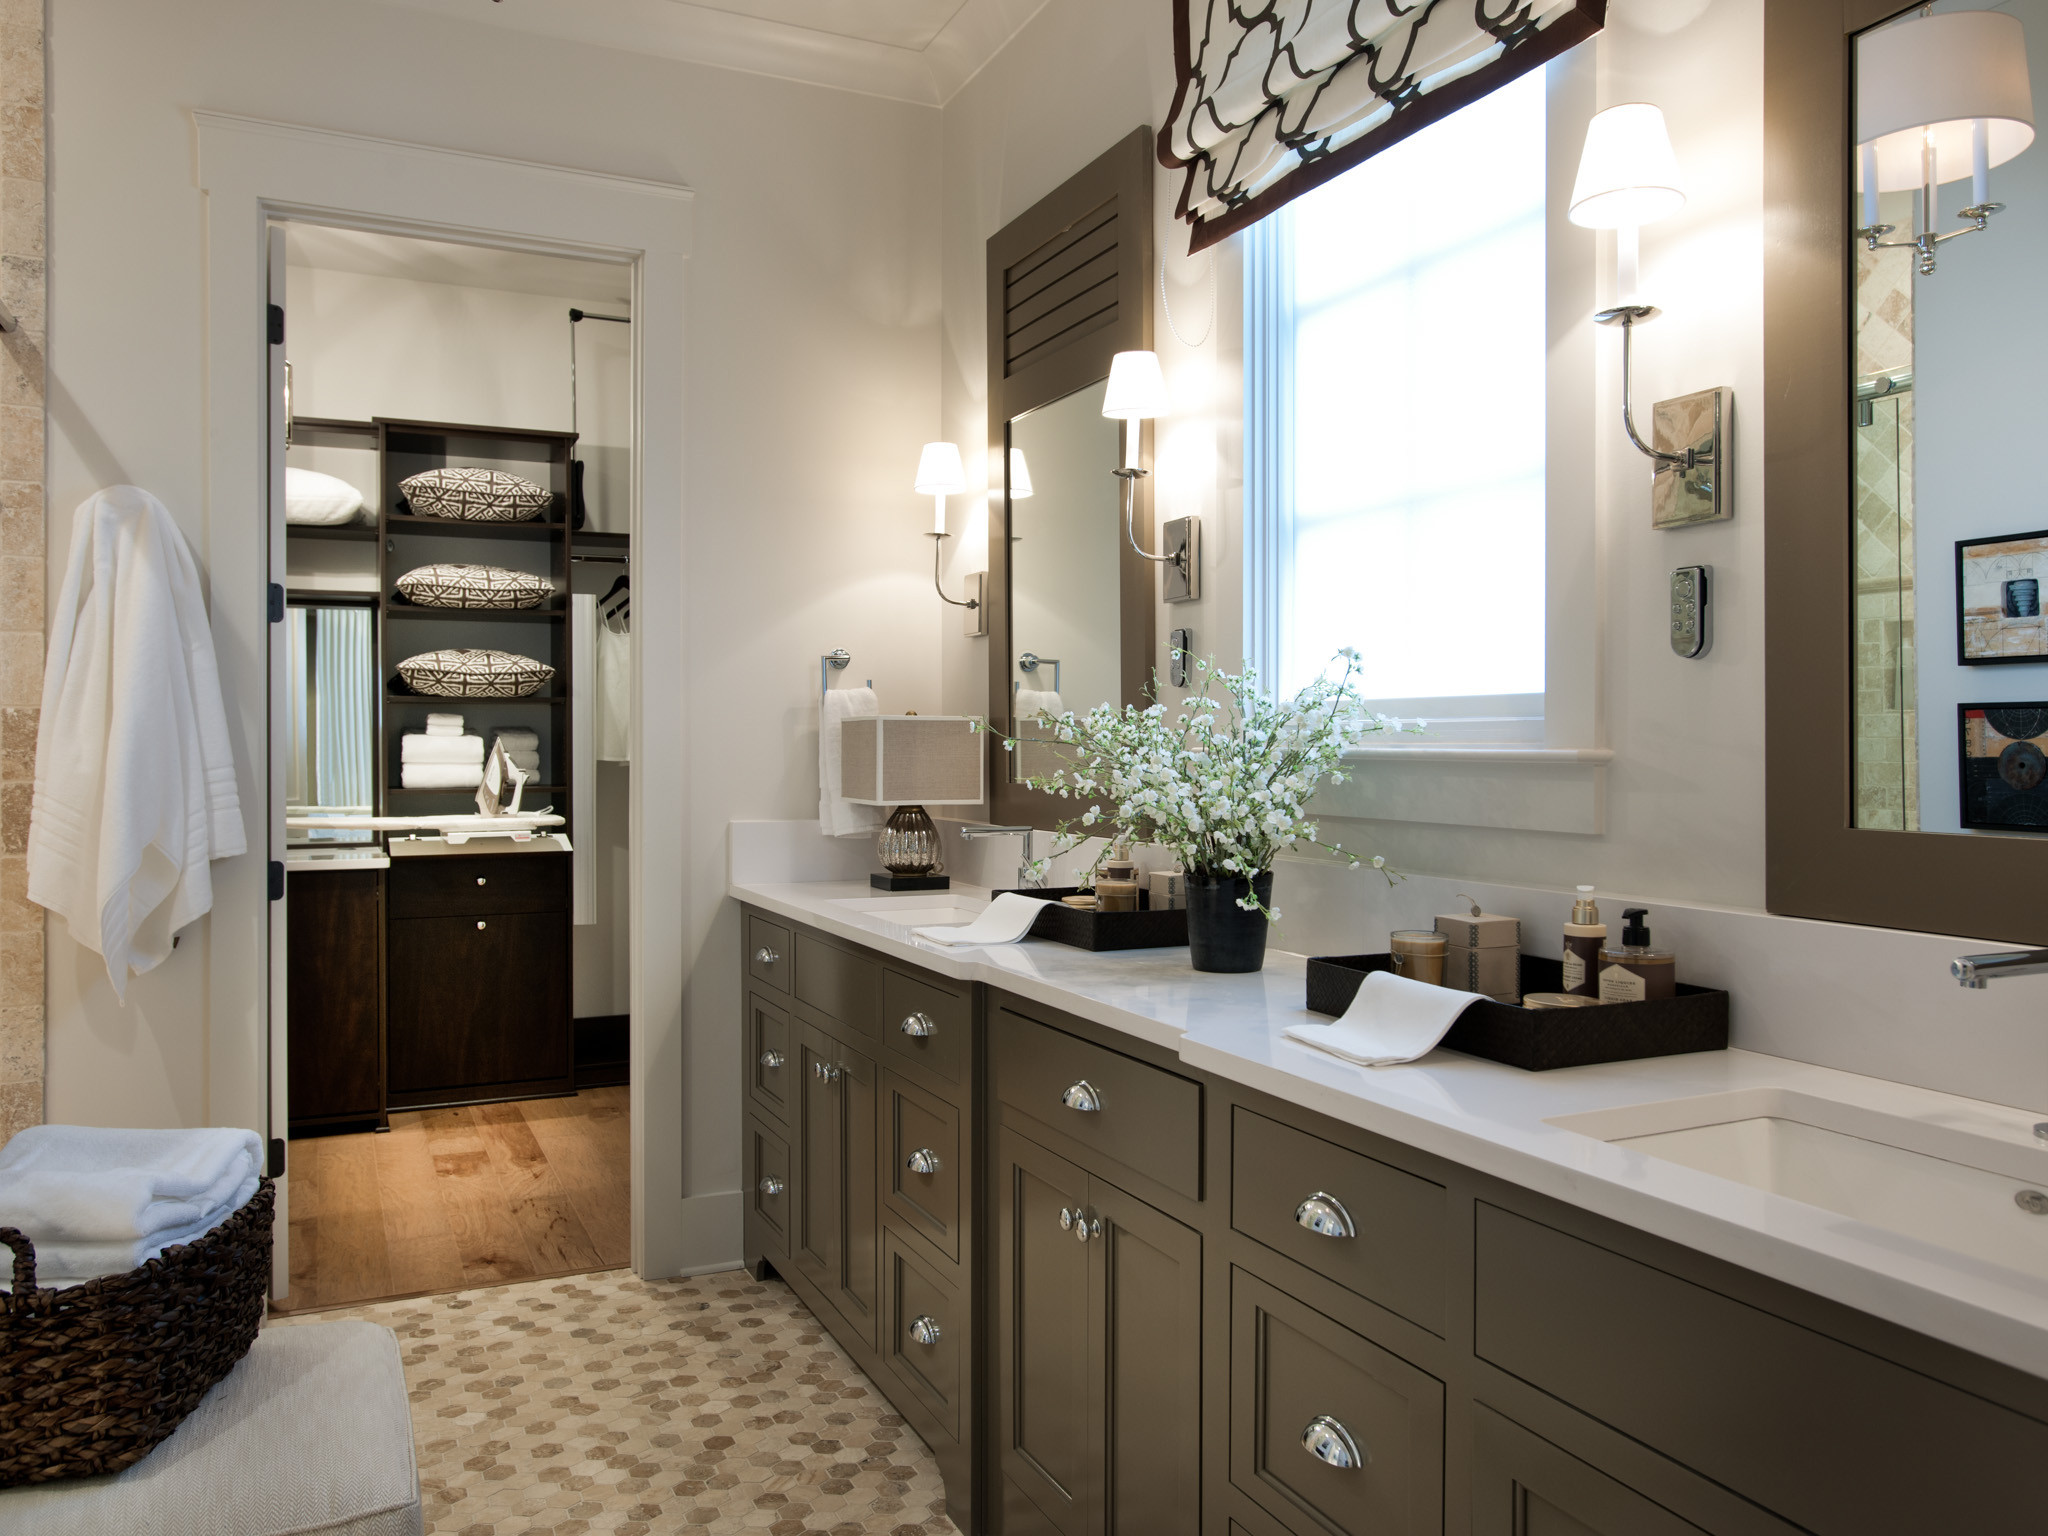 Master Bathroom Layout
 How to Improve Master Bathroom Designs in Better Way